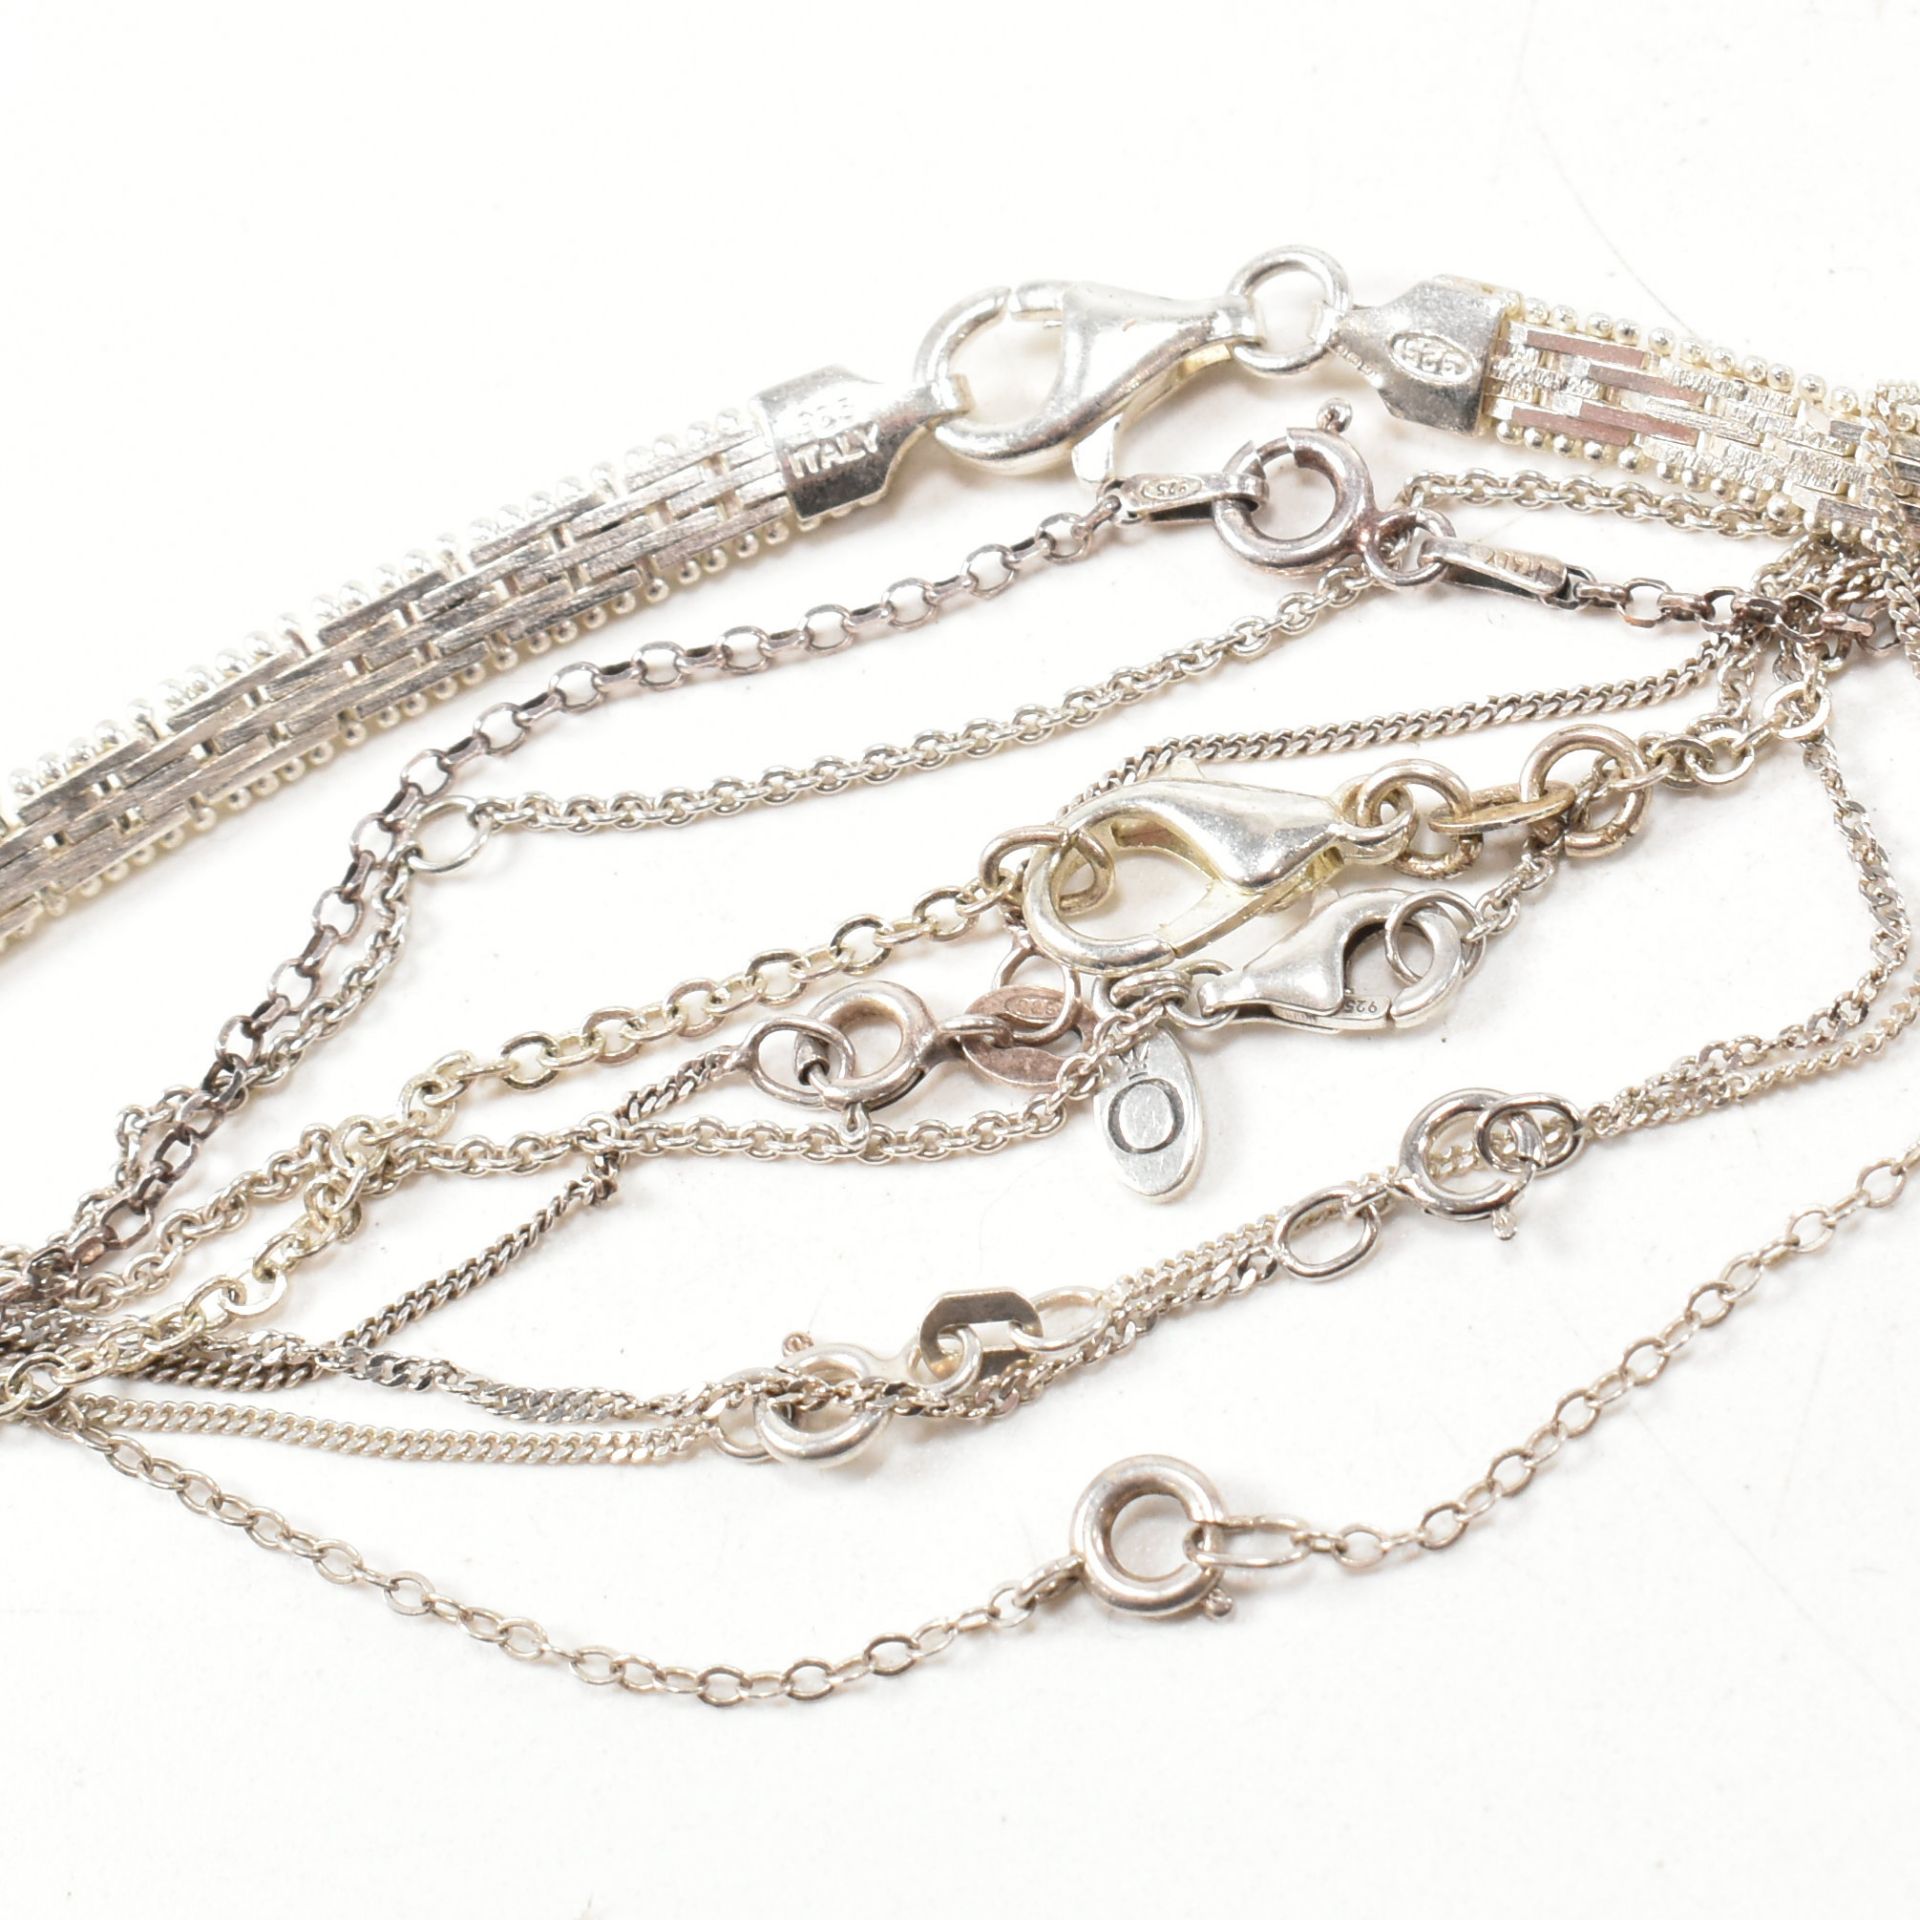 ASSORTED SILVER CHAIN NECKLACES - Image 3 of 5